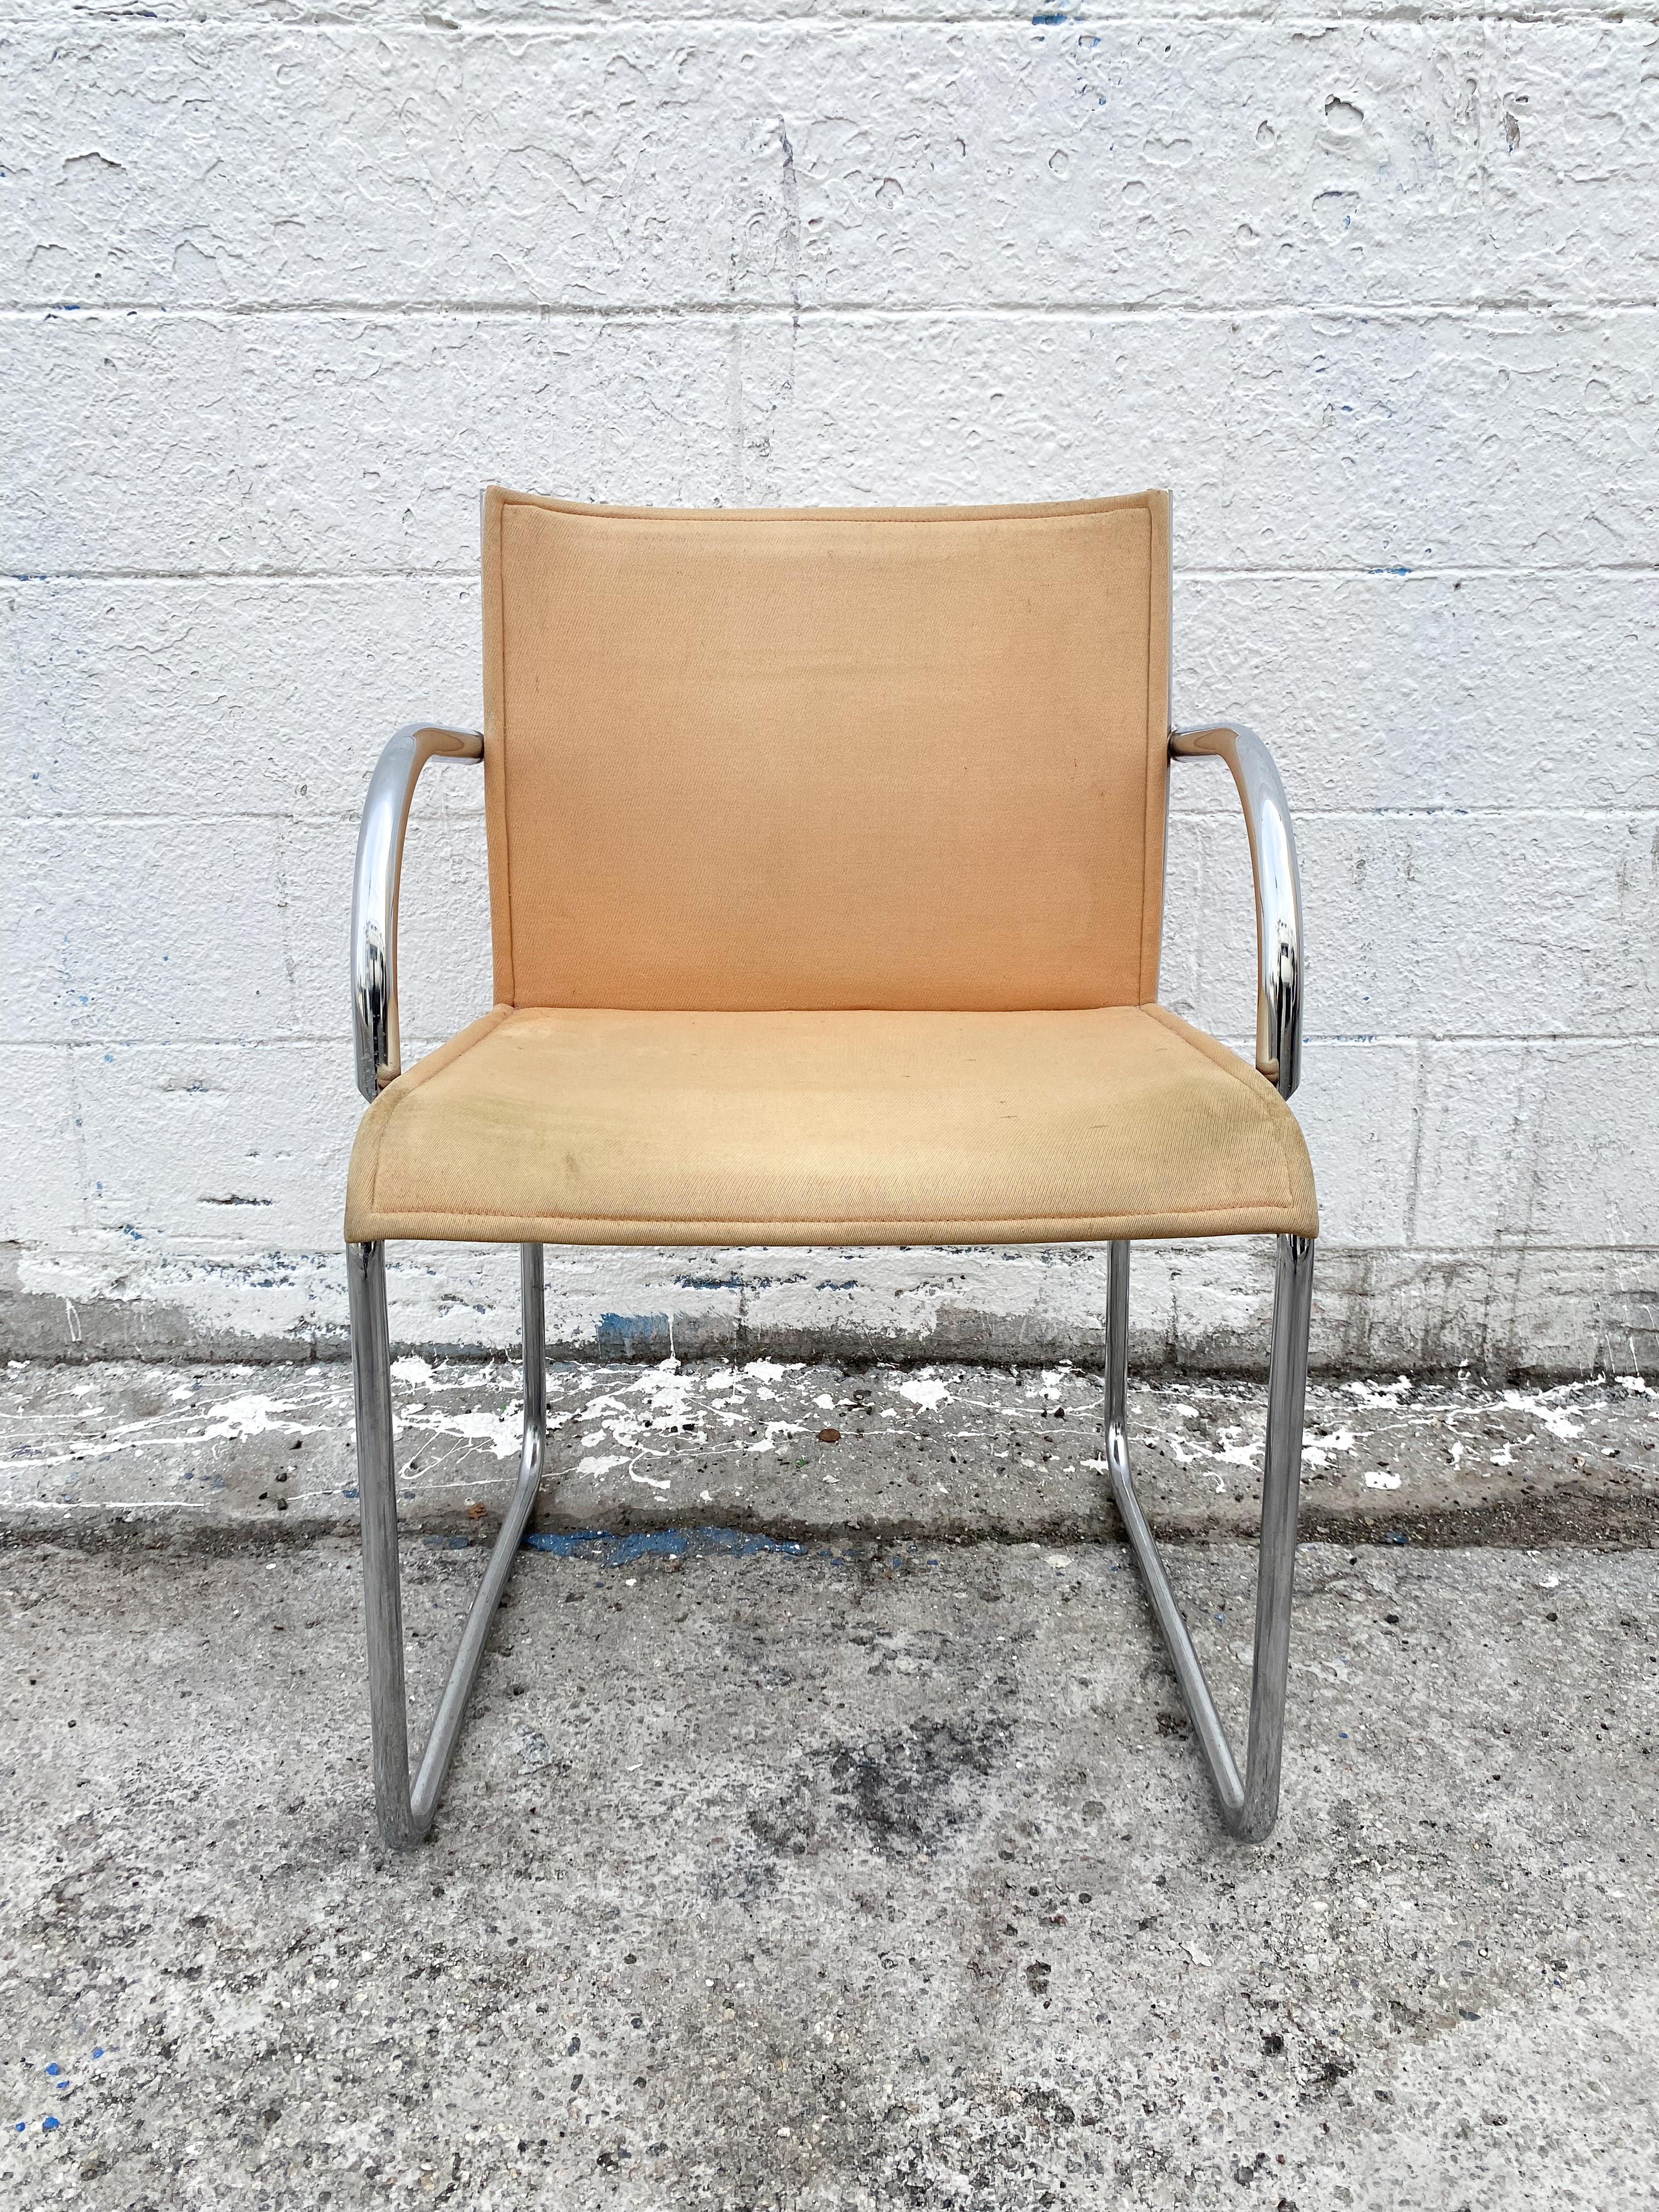 Immerse yourself in the distinct appeal of this exceptionally rare Knoll 1407 chair. An embodiment of Richard Schultz's visionary design from the 1980s, this captivating piece reflects the aesthetic appeal of both the Cesca chair and a bicycle's